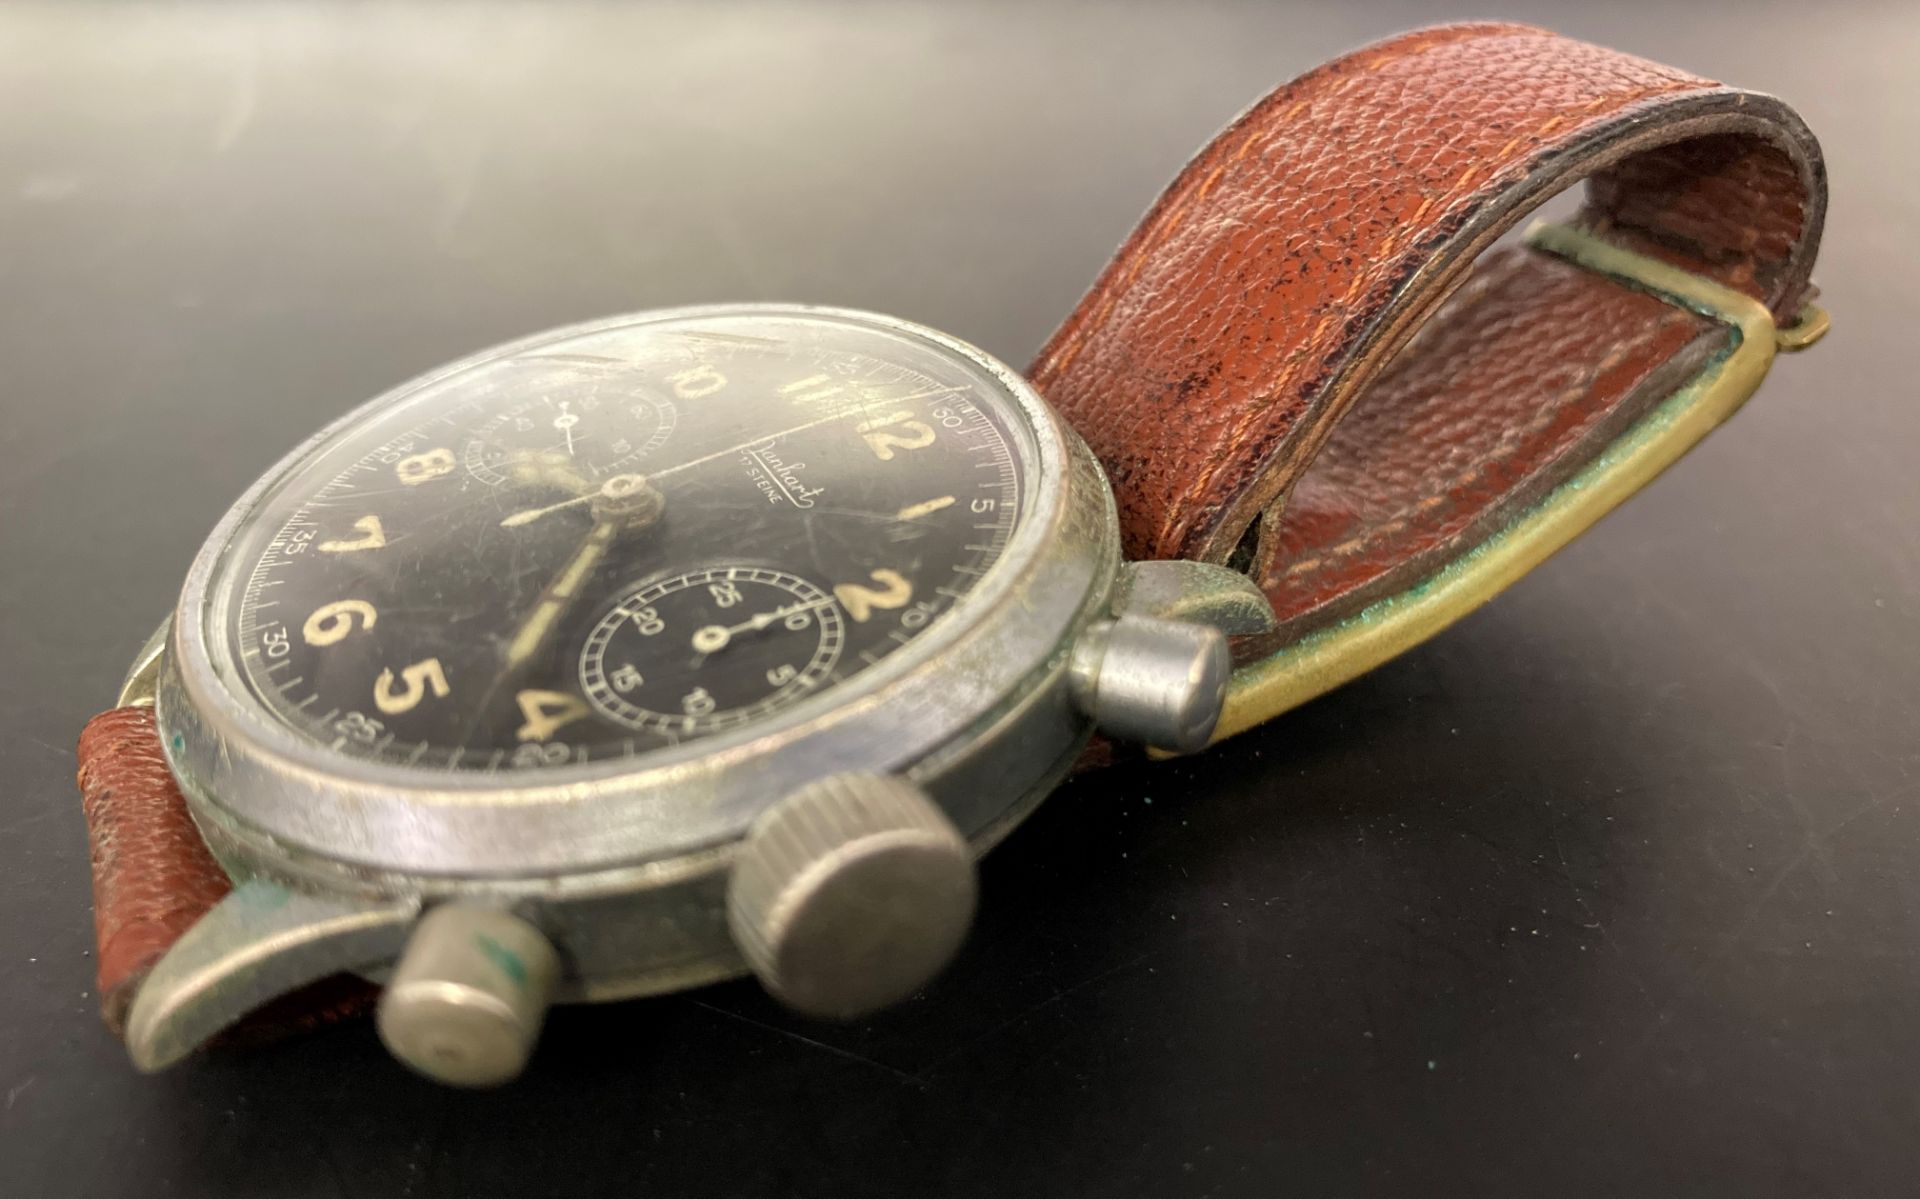 A Hanharts World War II Luftwaffe pilots chronograph with black face and brown leather strap - Image 3 of 10